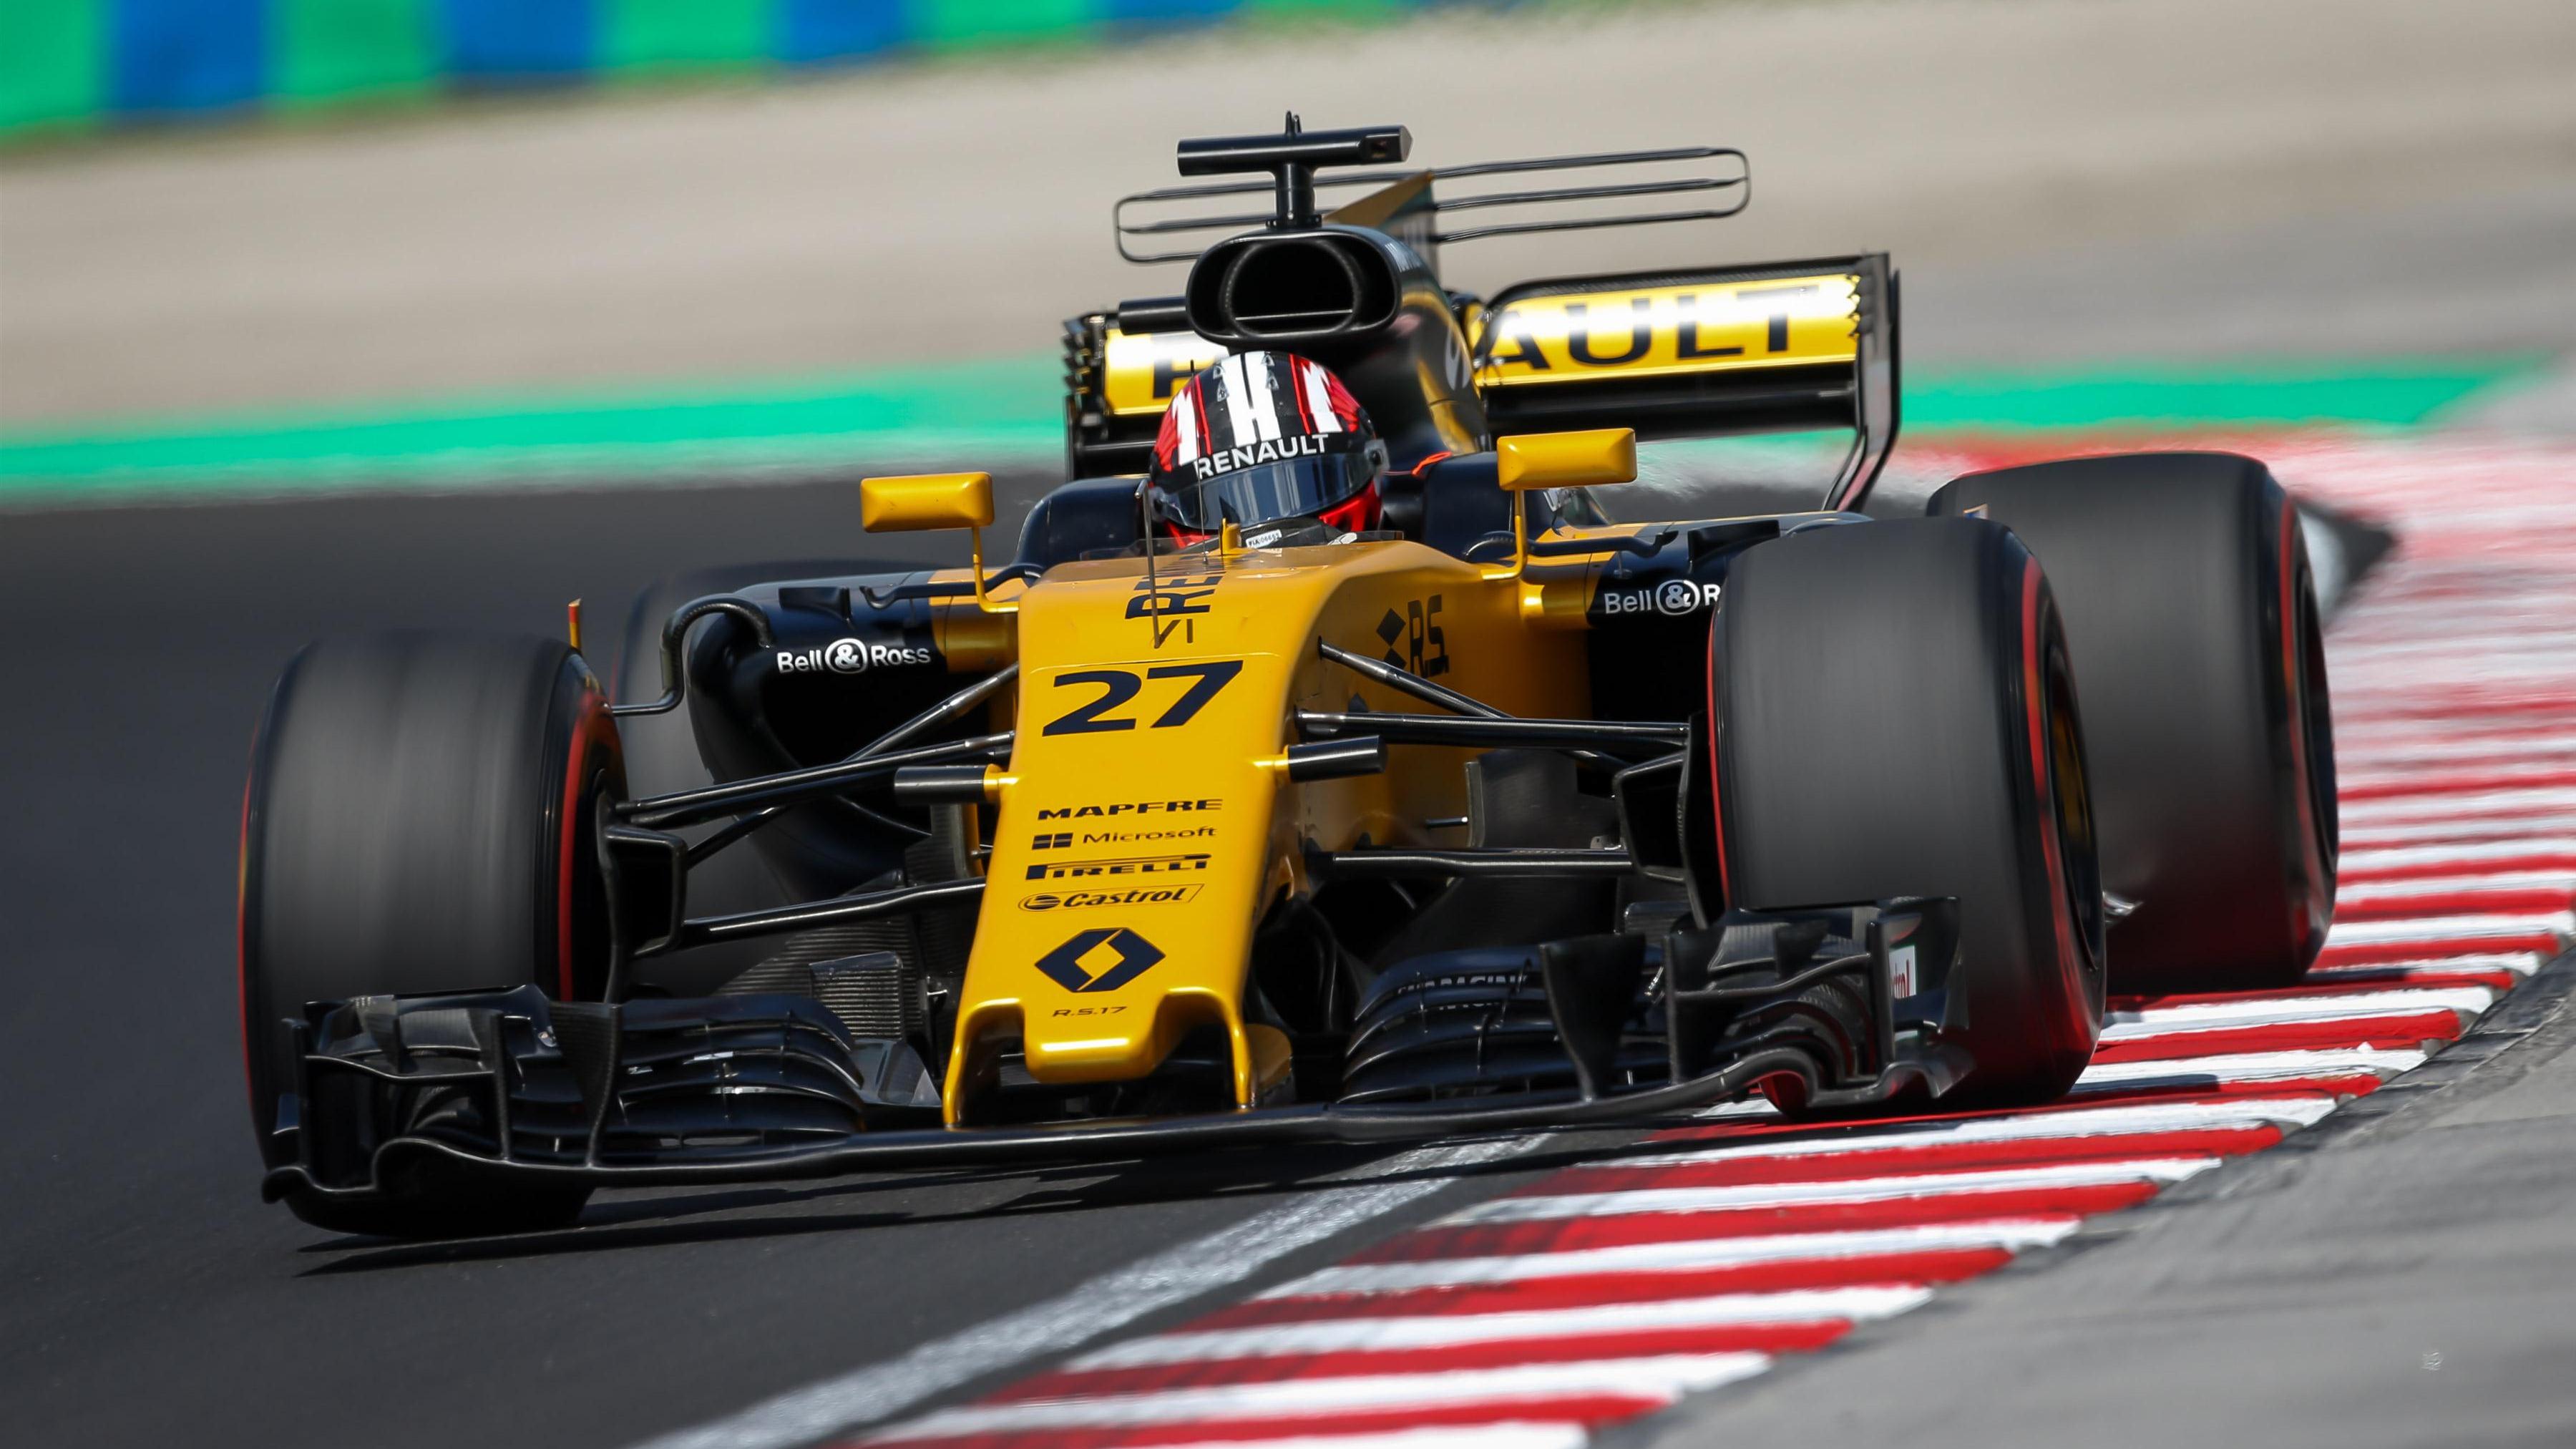 The Unwanted Record That Hulkenberg Is Set To Make His Own